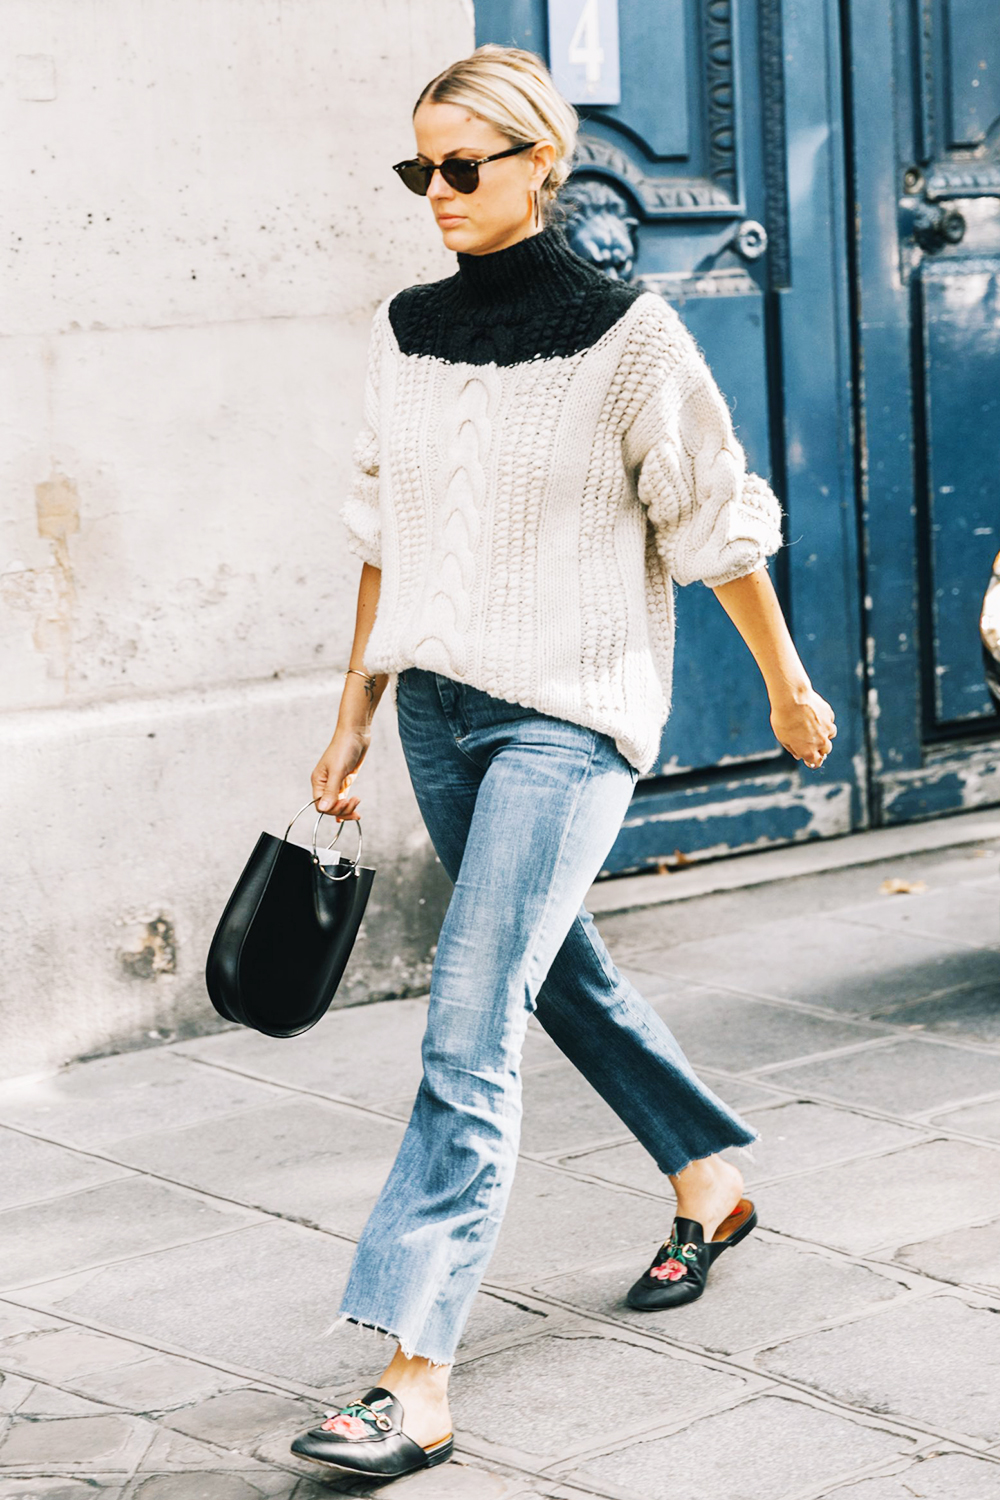 The Cute, Casual Outfits It Girls Wear 